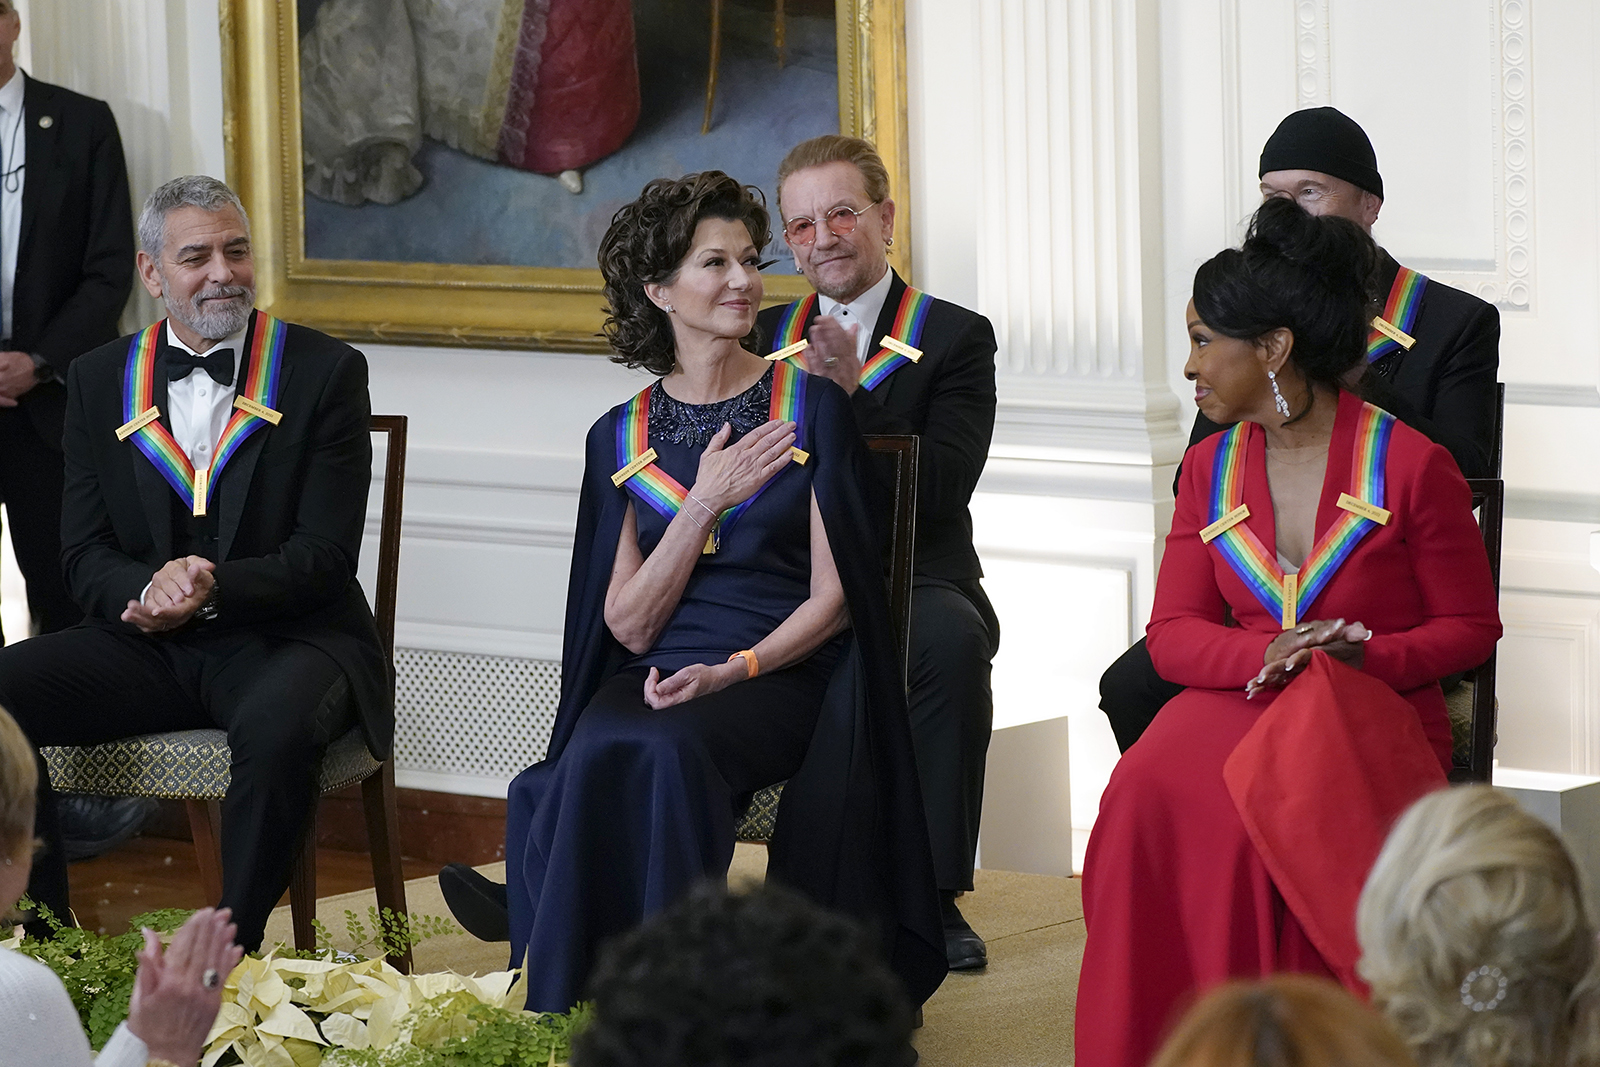 Contemporary Christian singer Amy Grant, center, reacts as she is recognized by President Joe Biden during the Kennedy Center honorees reception at the White House in Washington, Sunday, Dec. 4, 2022. The 2022 Kennedy Center Honorees include from left, George Clooney, Amy Grant, Bono, Gladys Knight, and The Edge. (AP Photo/Manuel Balce Ceneta)